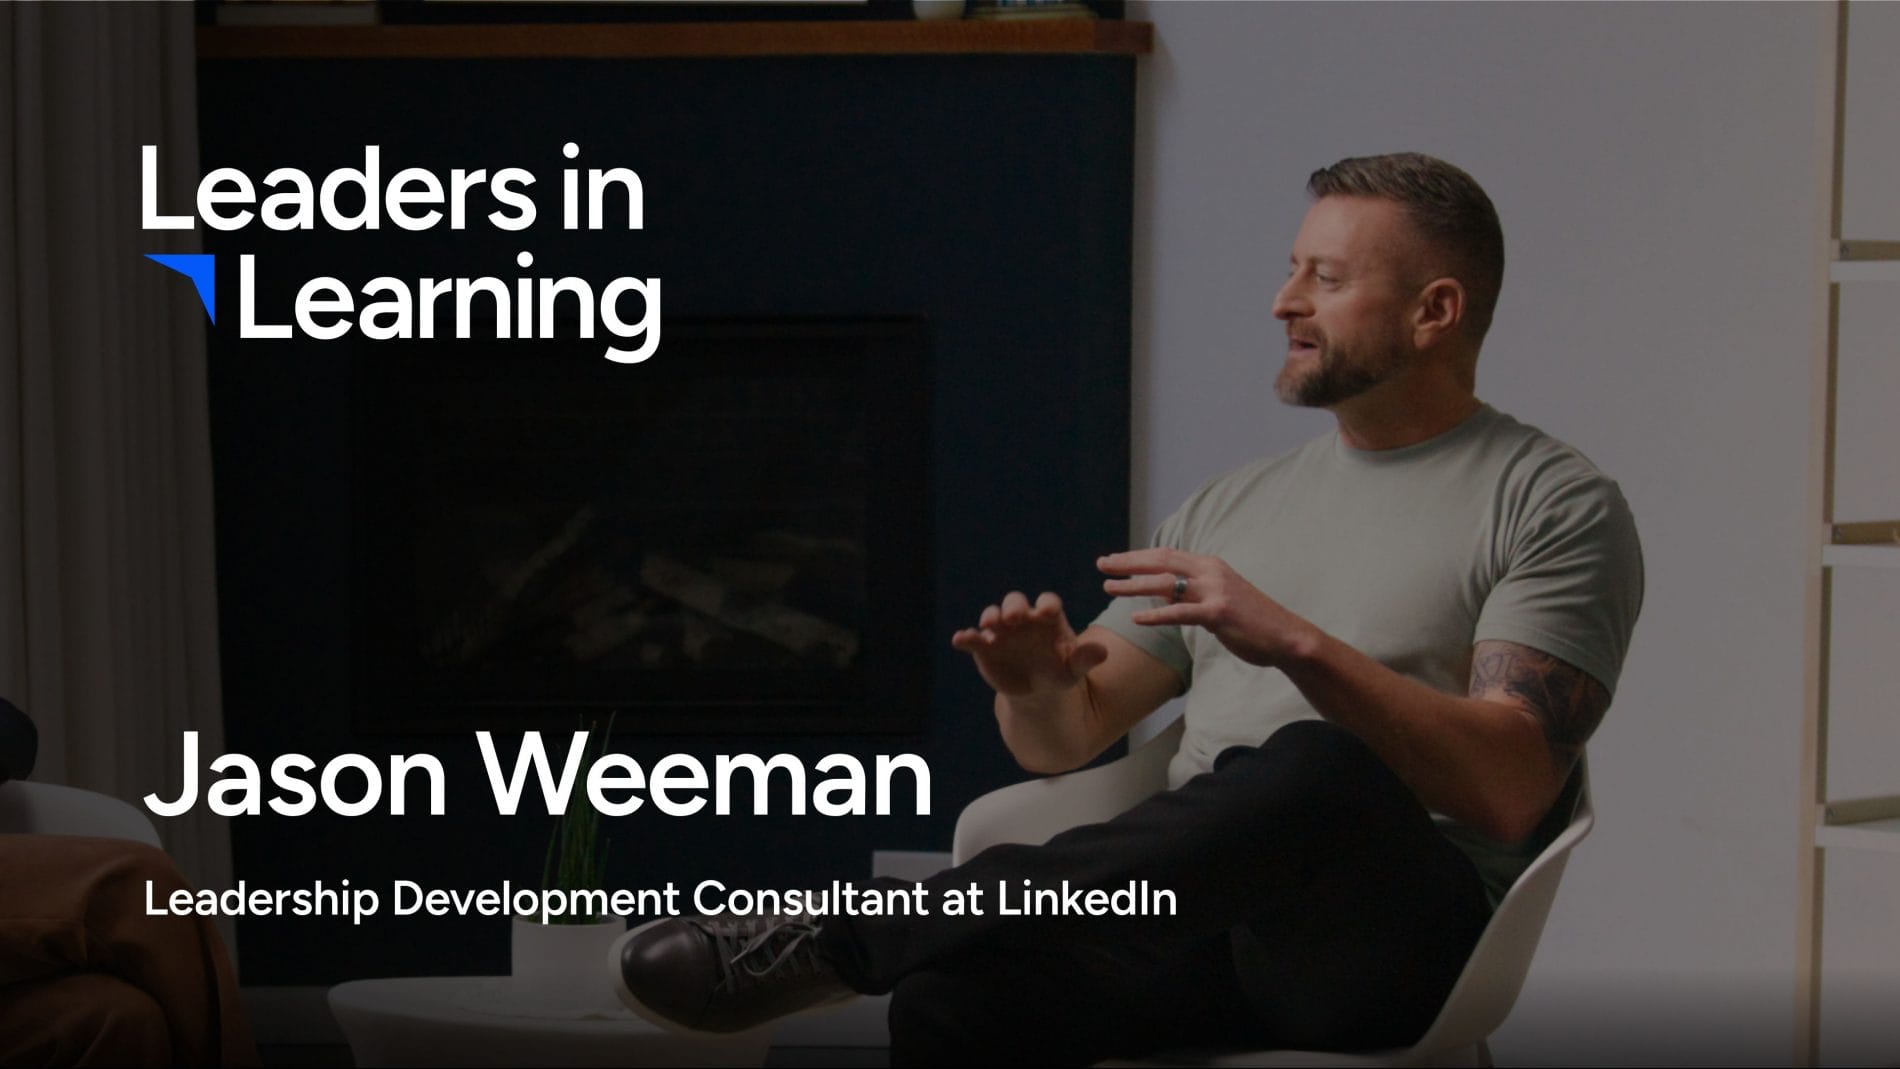 Episode 3: Jason Weeman proves vulnerability can be a leader’s greatest strength